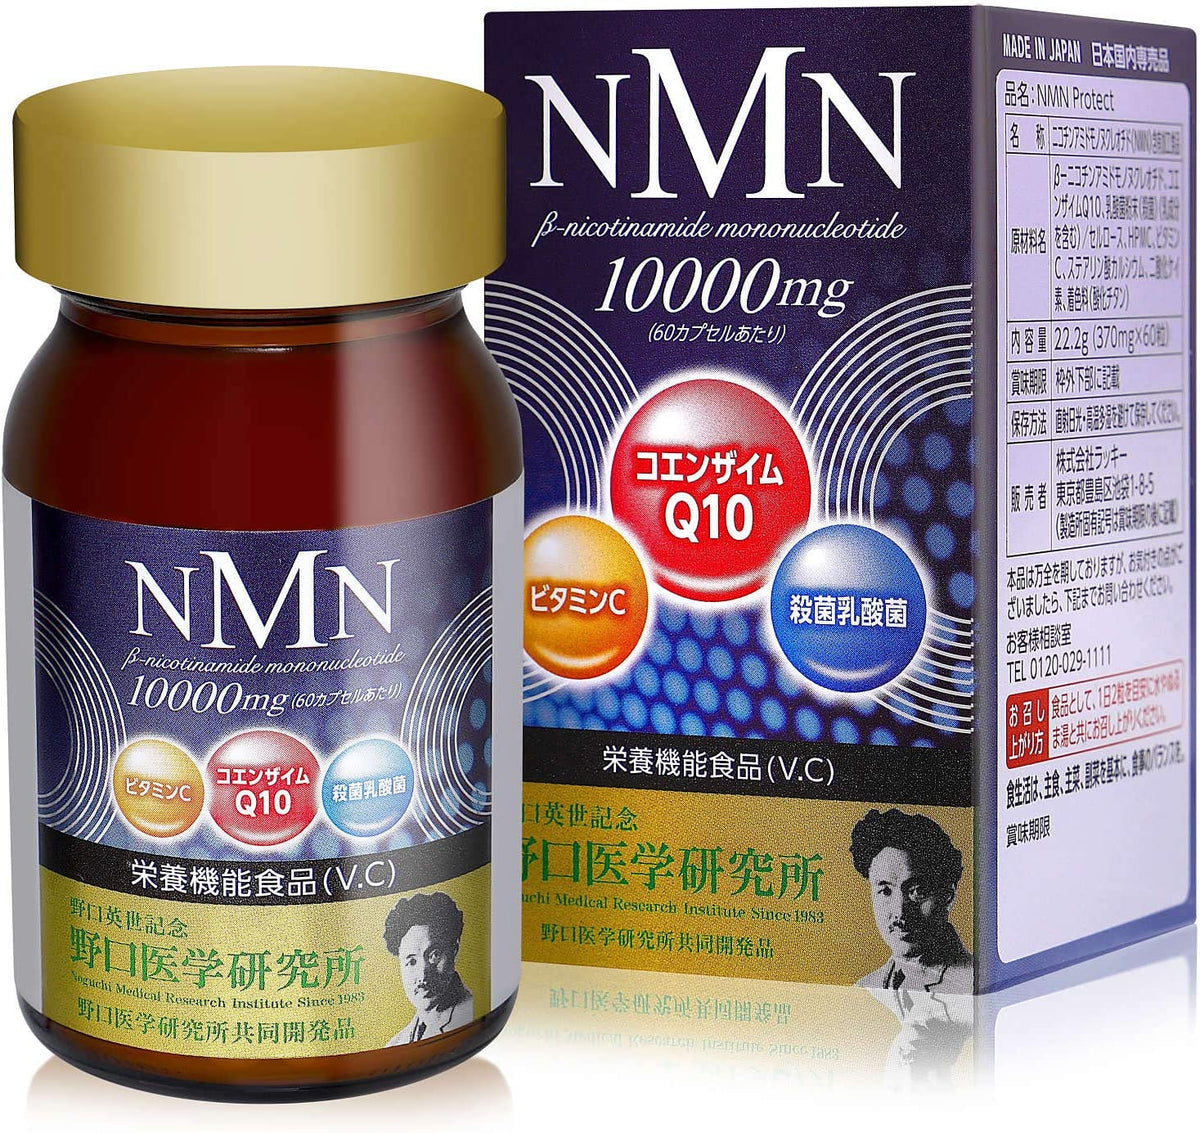 NMN 10000mg NMN Protect Noguchi Medical Research Institute – Goods